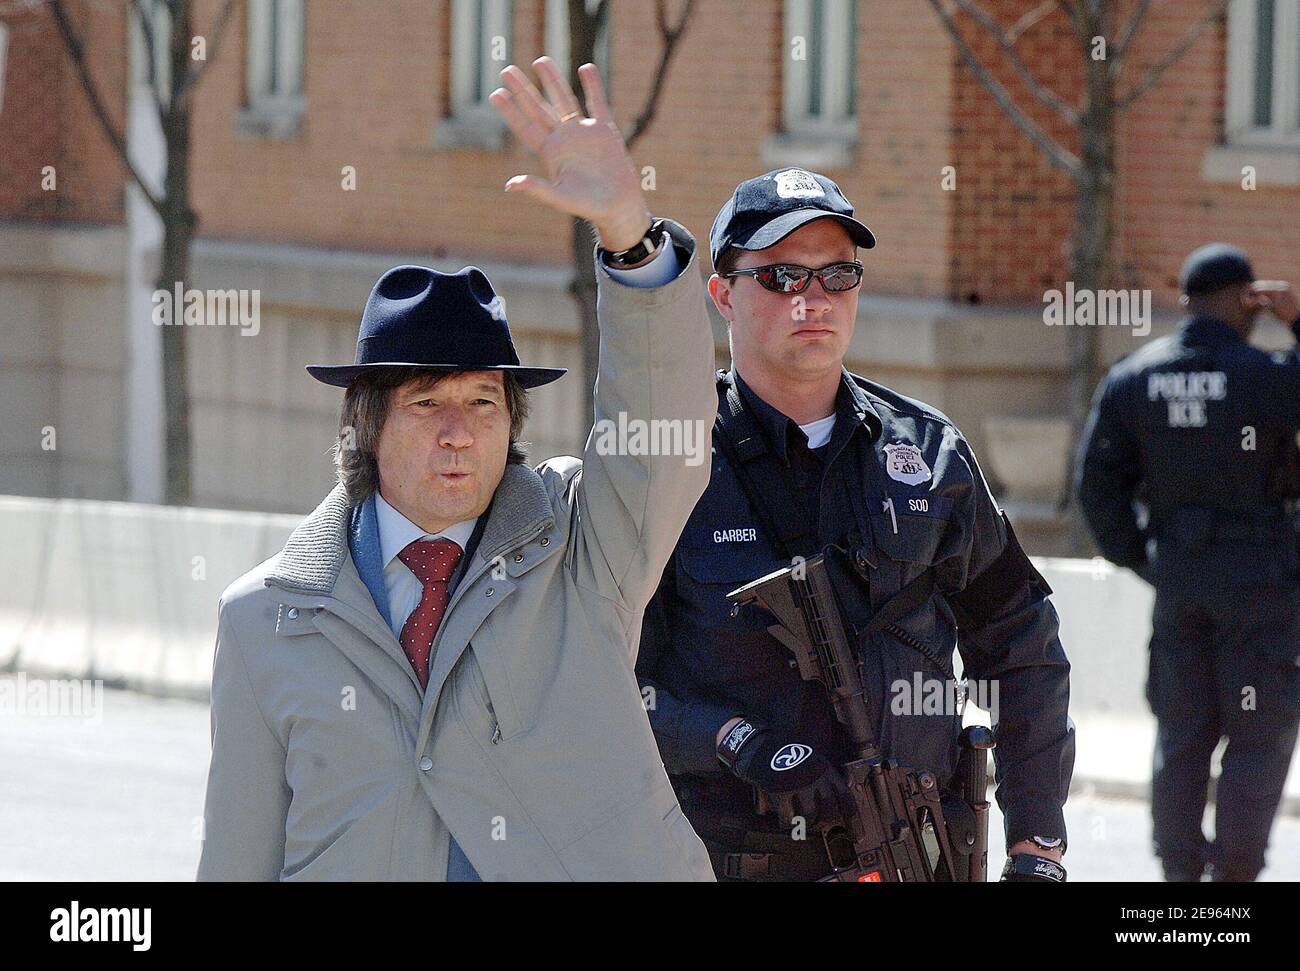 Francois Roux, lawyer of Zacarias Moussaoui's mother, Aicha el-Wafi, leaves the Albert V. Bryan federal courthouse, in Alexandria, VA, USA, on March 8, 2006 to return in Paris, France. Photo by Olivier Douliery/ABACAPRESS.COM Stock Photo